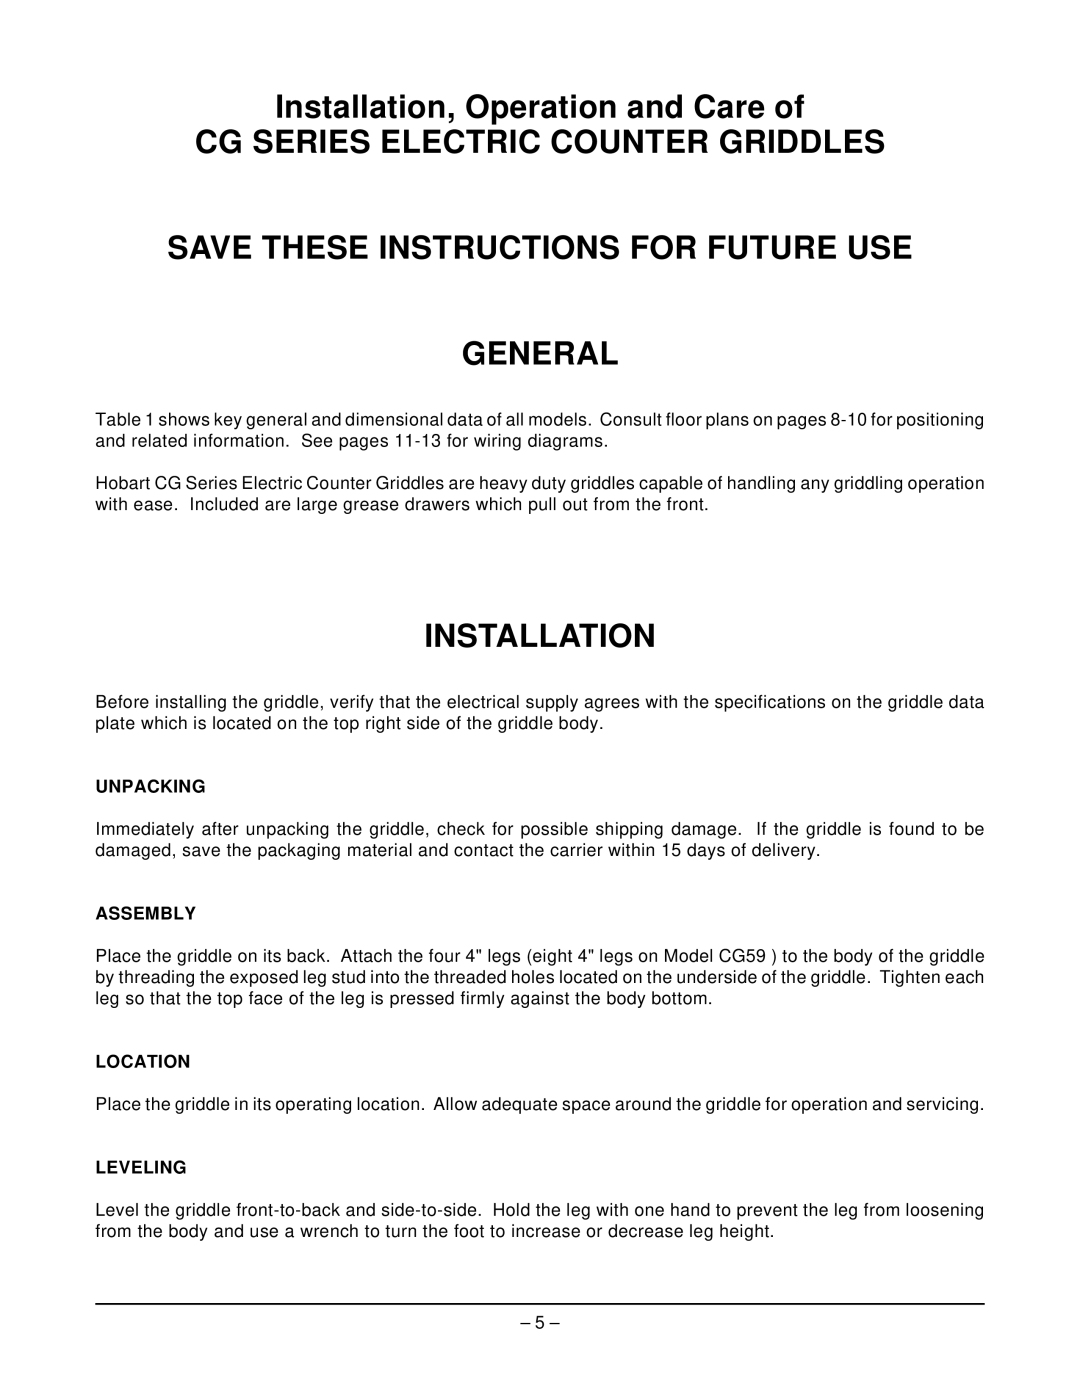 Hobart CG55 ML-CG55240S001 Installation, Operation and Care of, Save These Instructions For Future Use General, Unpacking 